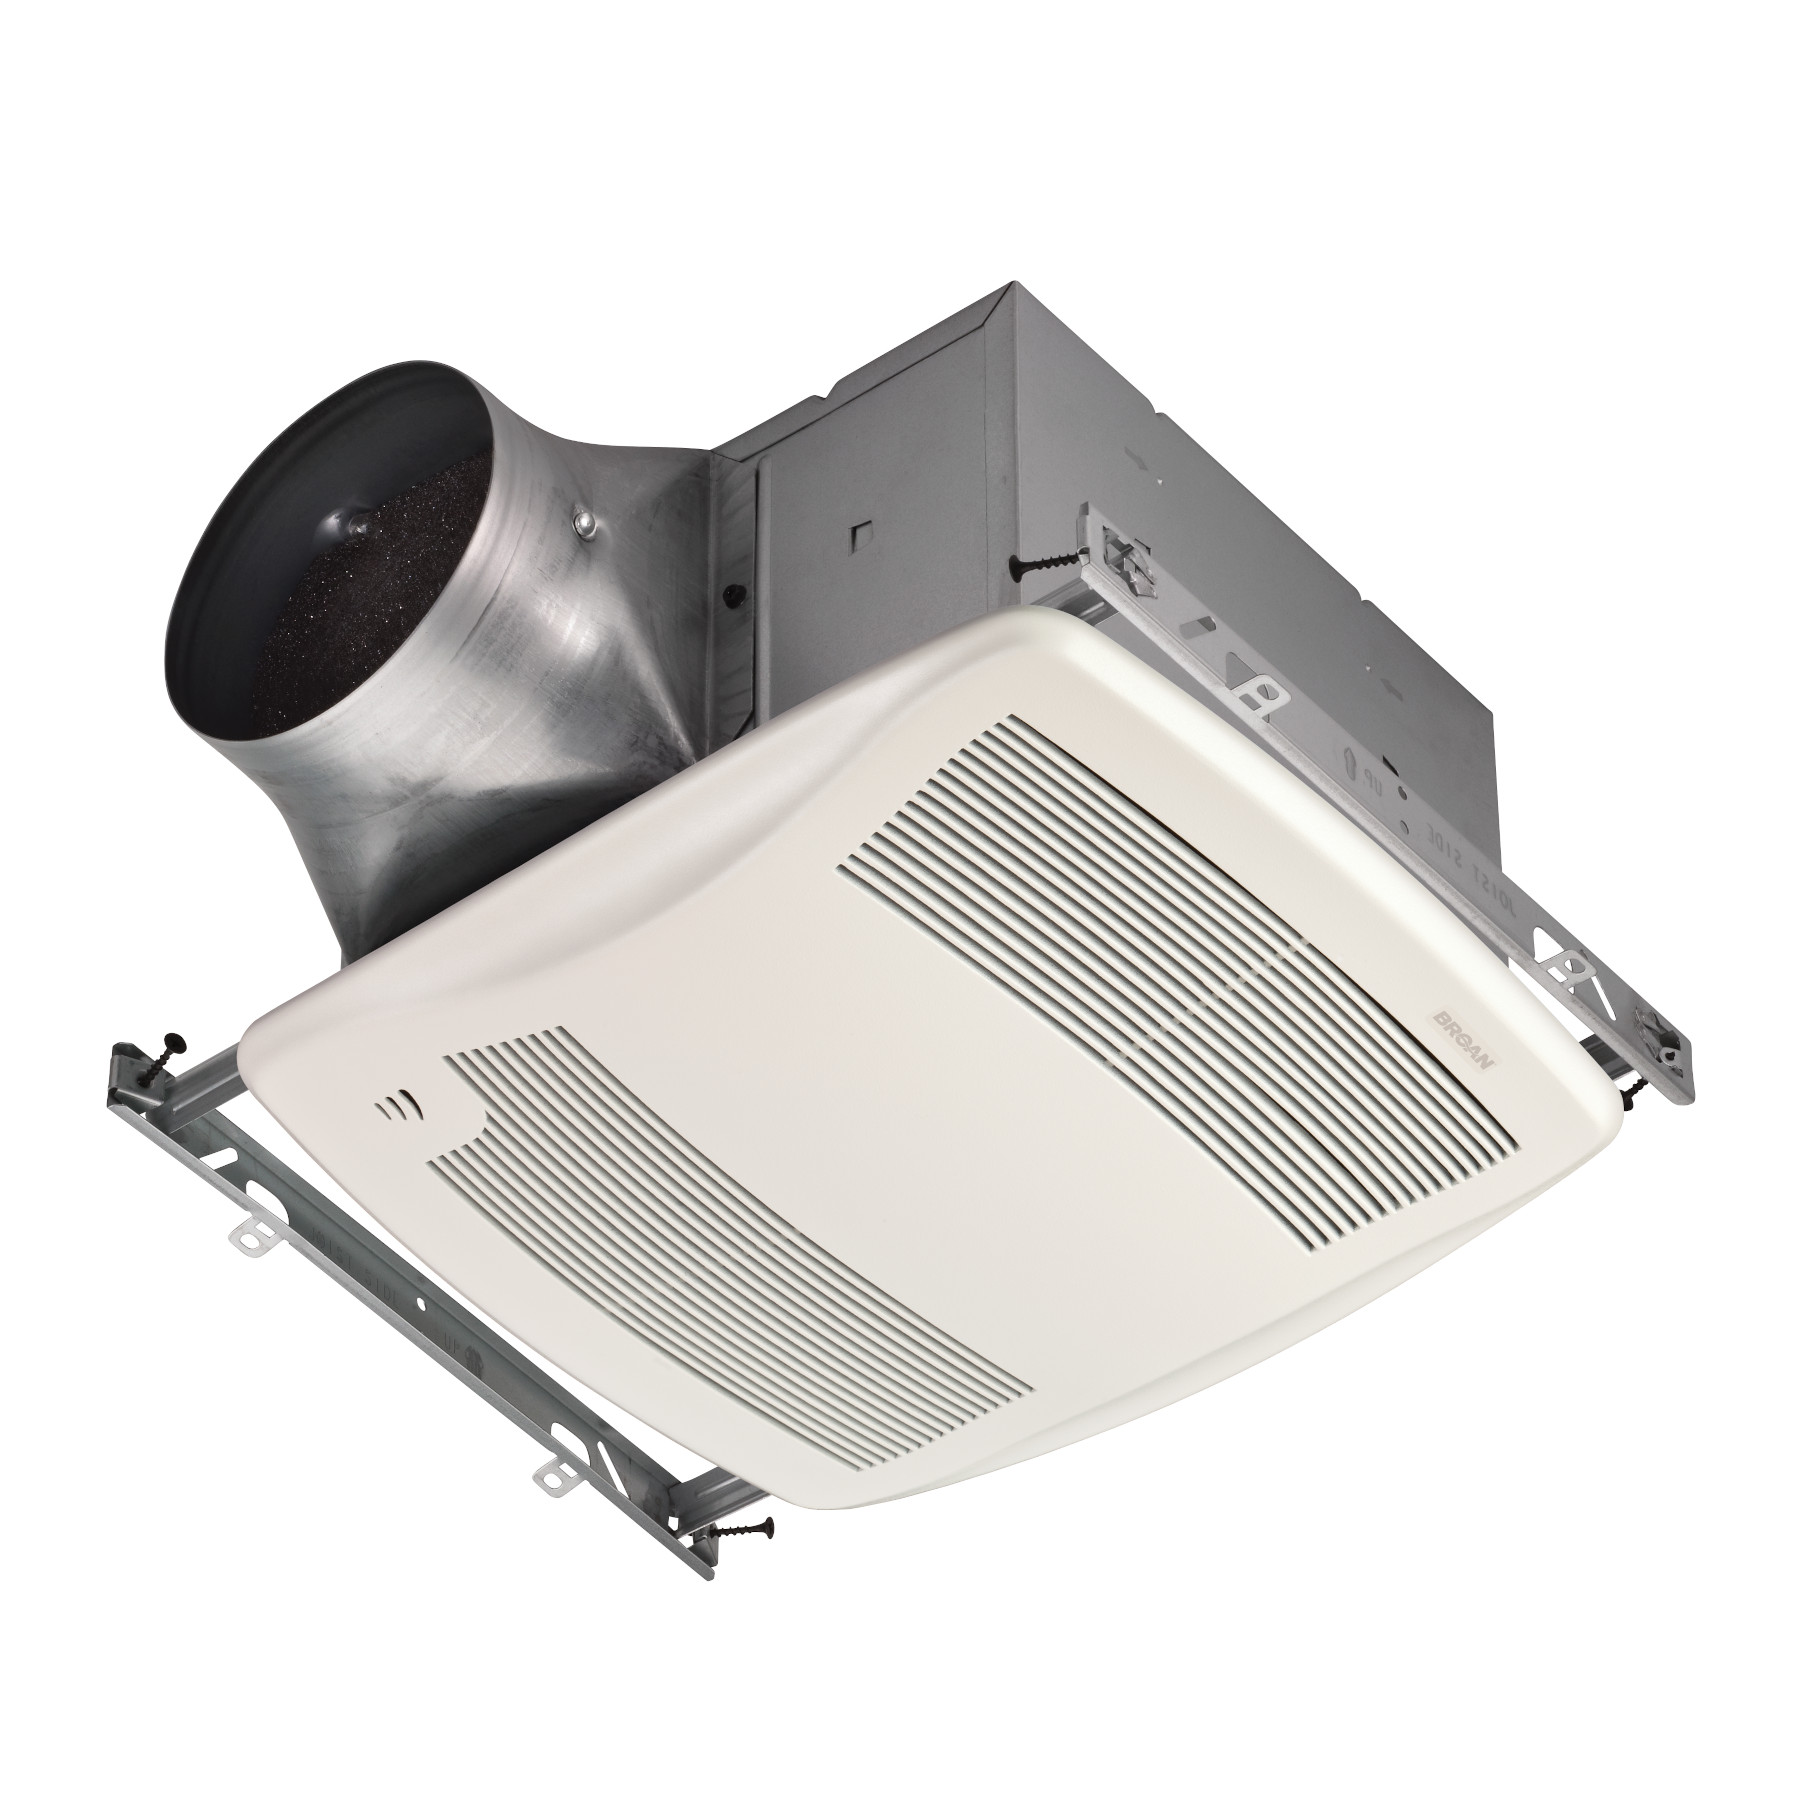 ULTRA GREEN 110 CFM Ceiling Bathroom Exhaust Fan with Humidity Sensing, ENERGY STAR® certified